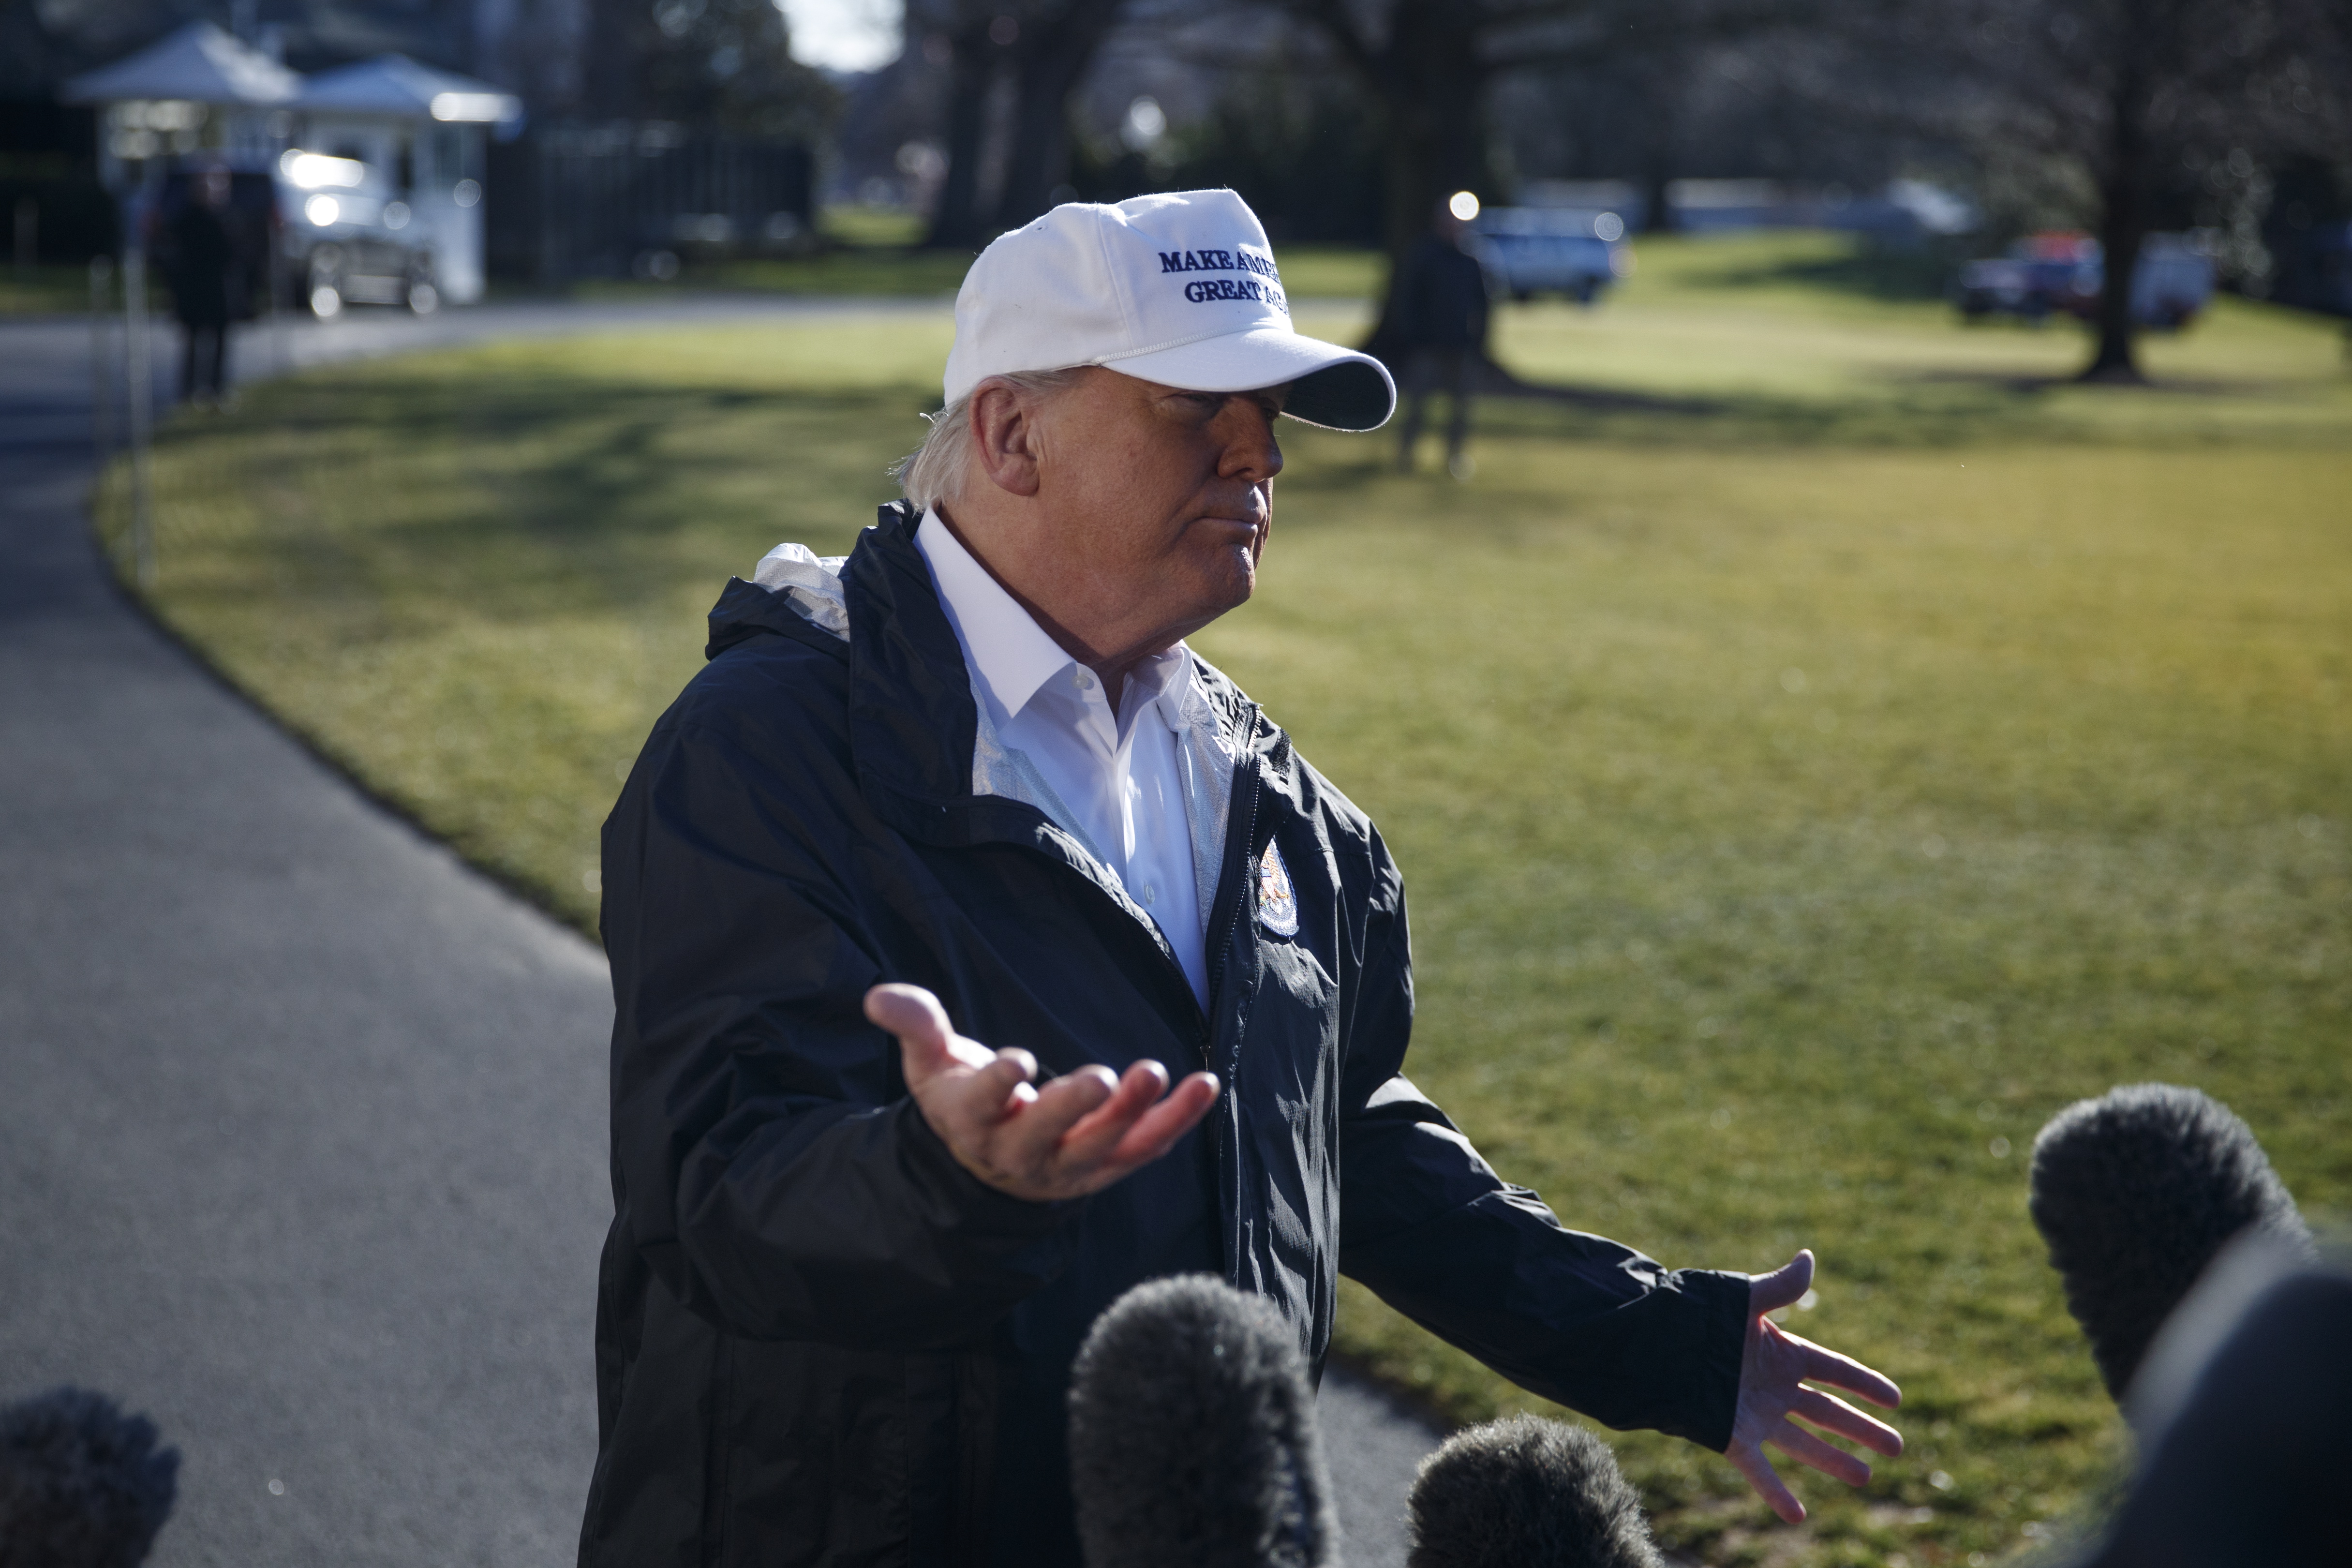 epa07273441 US President Donald J. Trump (C) responds to a question from the news media as he walks to board Marine One on the South Lawn of the White House in Washington, DC, USA, 10 January 2019. President Trump is traveling to Texas to participate in a roundtable on immigration and border security and to receive a briefing on border security.  EPA/SHAWN THEW